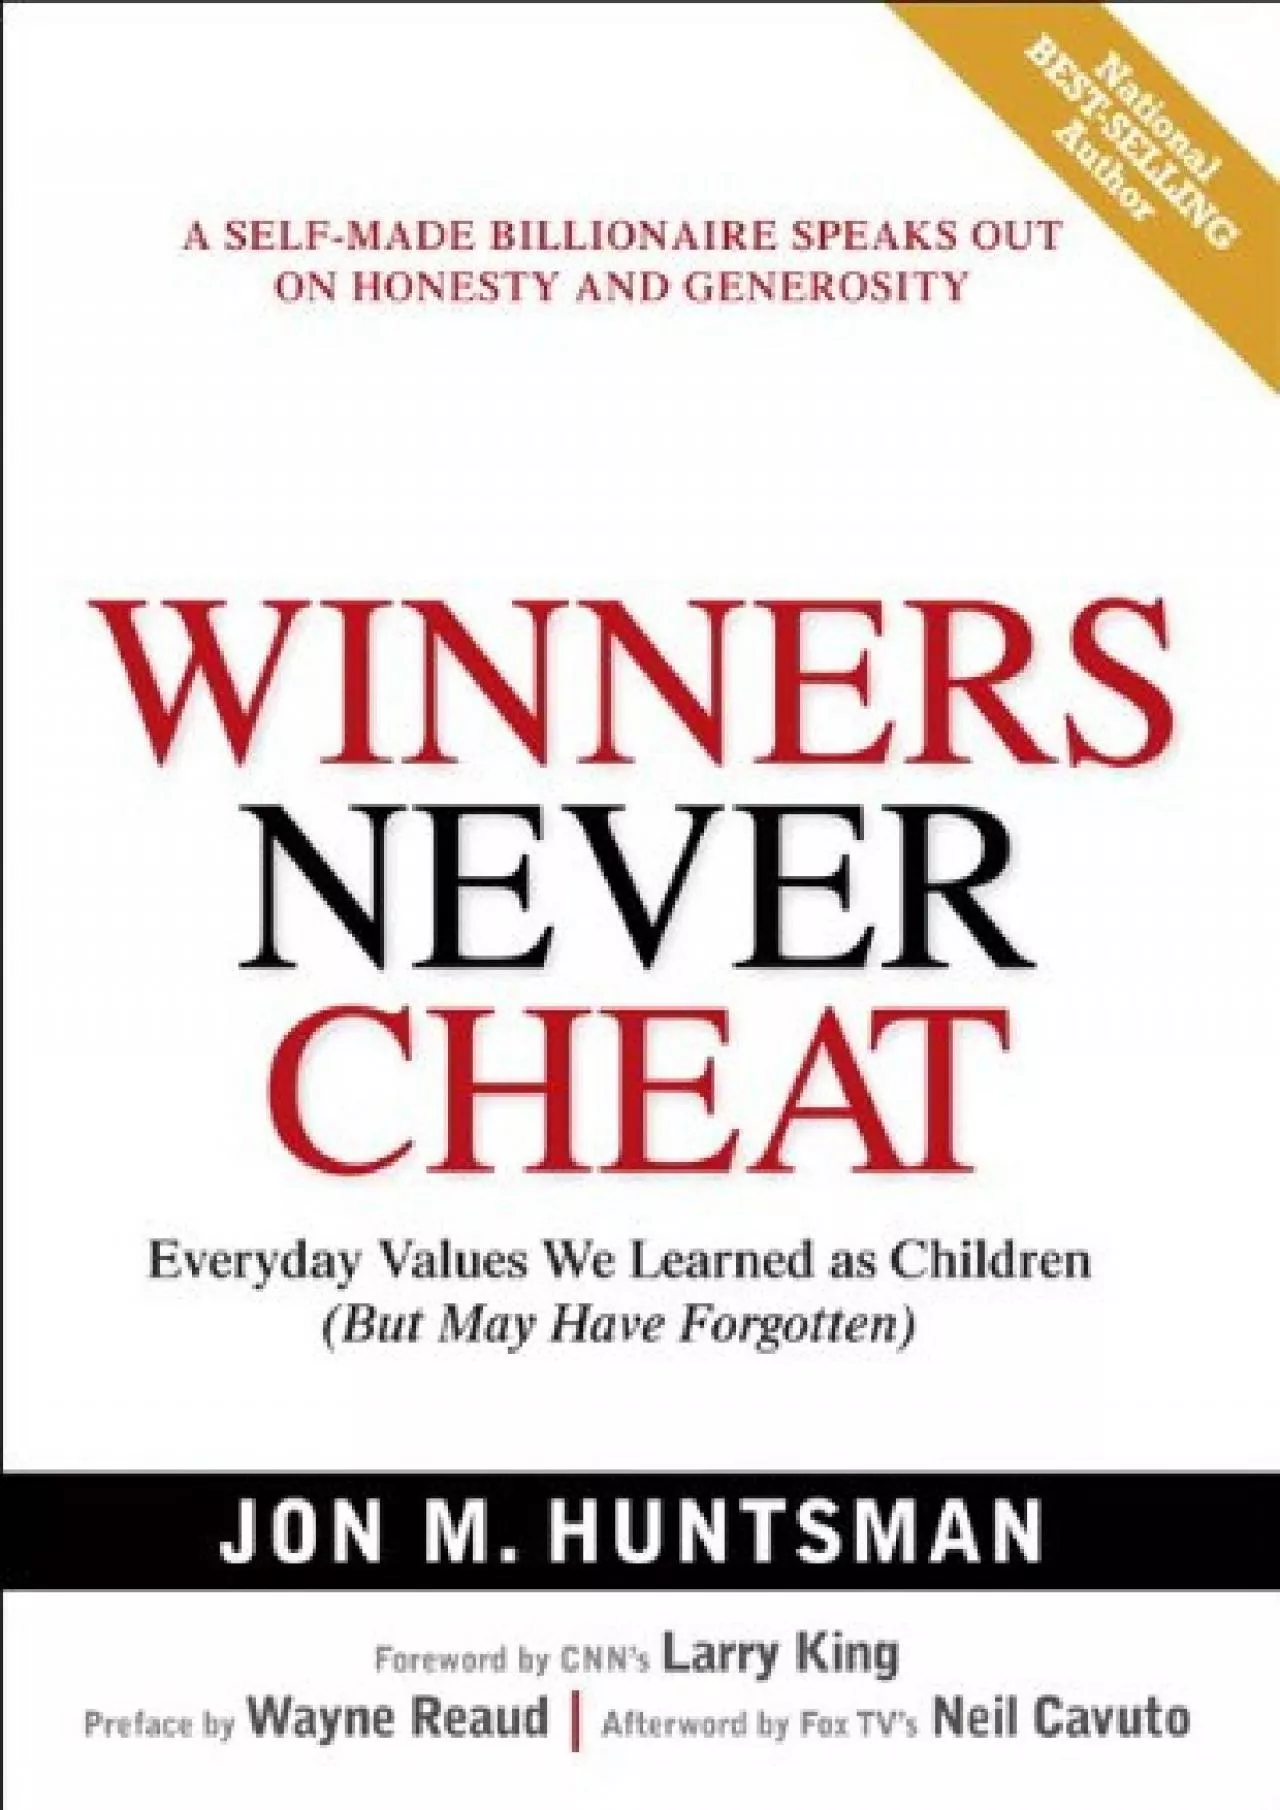 (BOOK)-Winners Never Cheat: Everyday Values We Learned As Children but May Have Forgotten